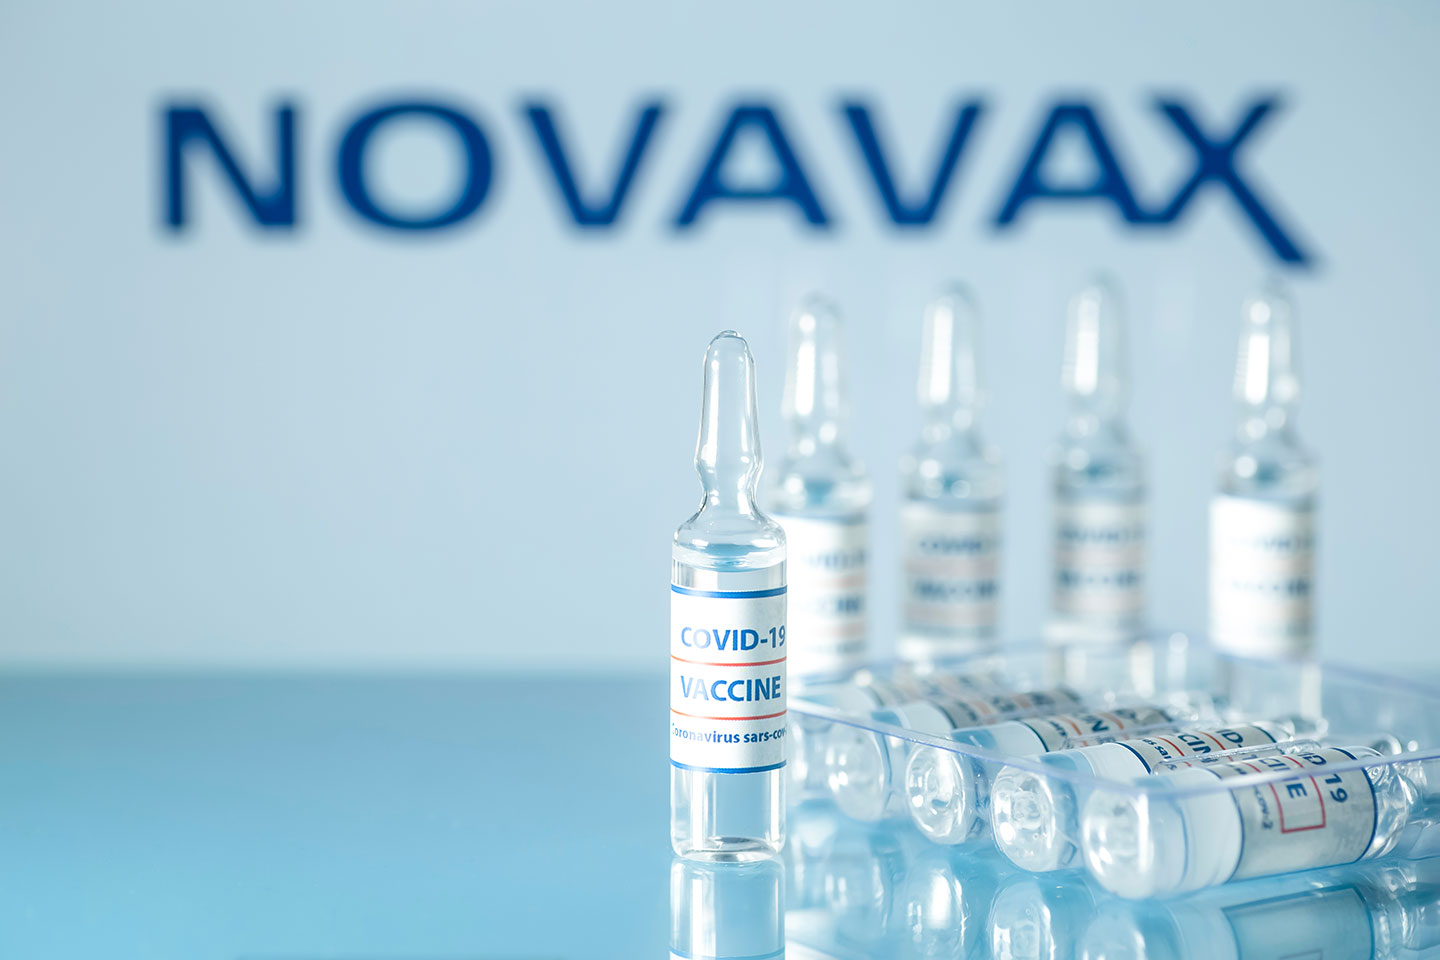 Gavi Signs Agreement With Novavax To Secure Doses On Behalf Of Covax Facility Gavi The Vaccine Alliance